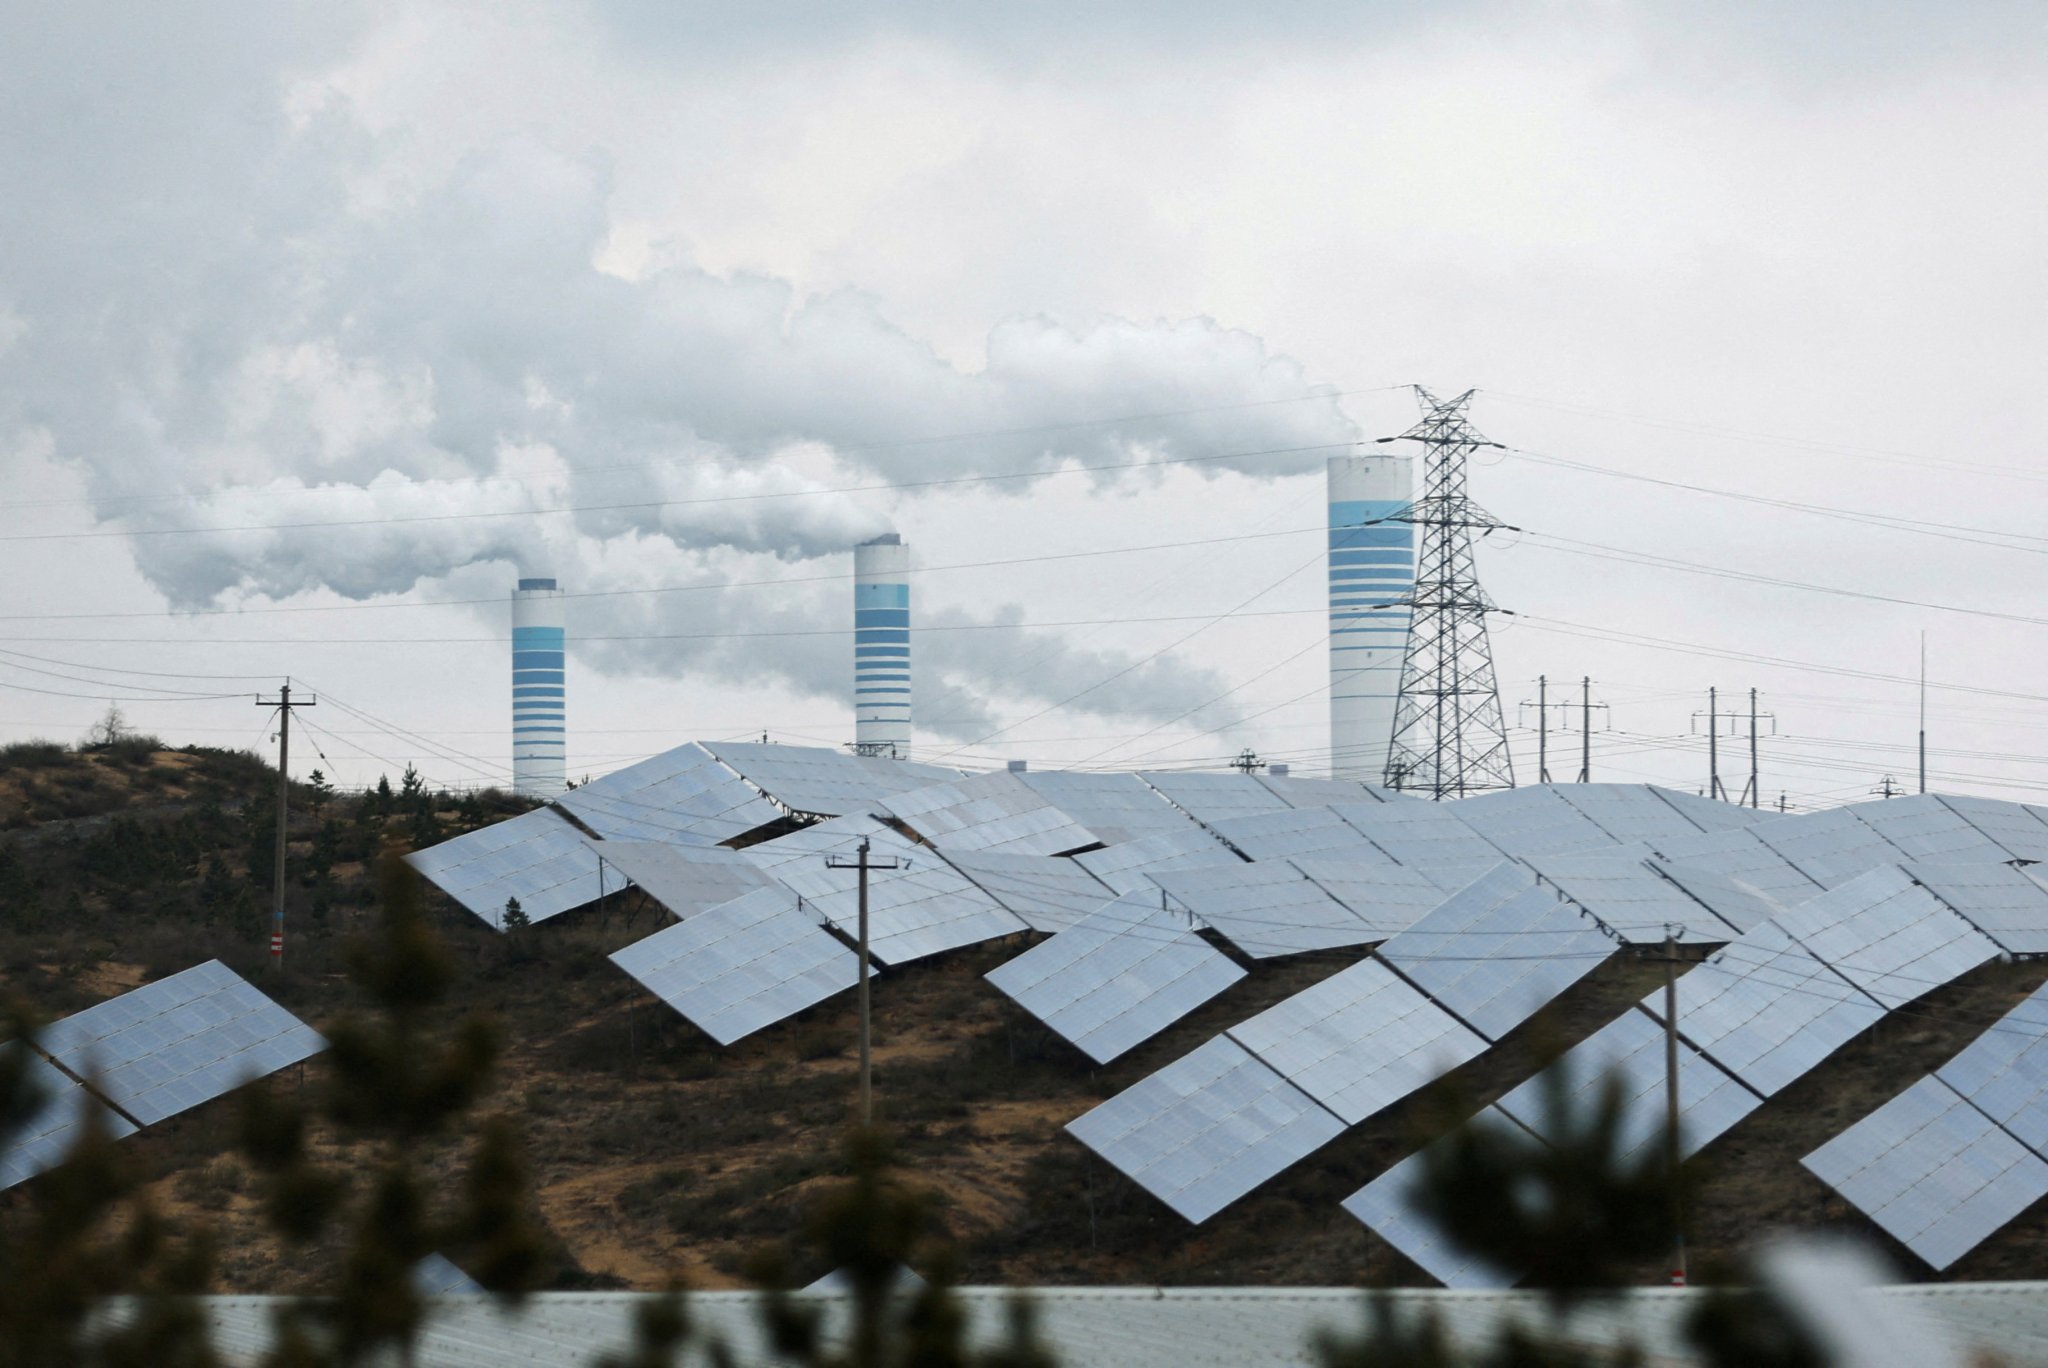 Clean power across industry is key to China achieving net zero. Here are two approaches that can accelerate its use